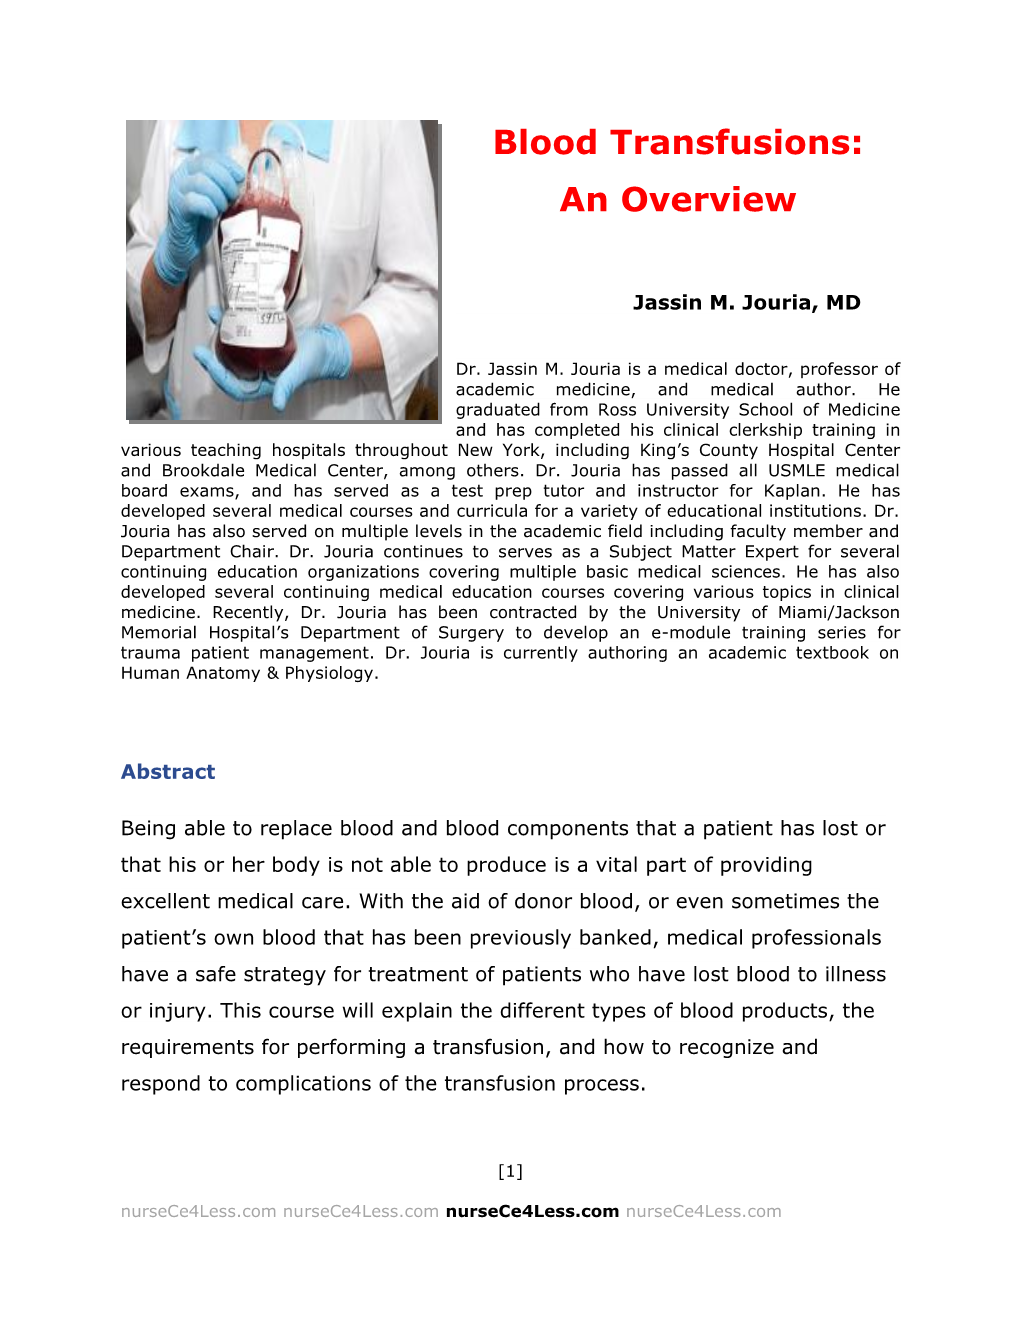 Blood Transfusions an Overview